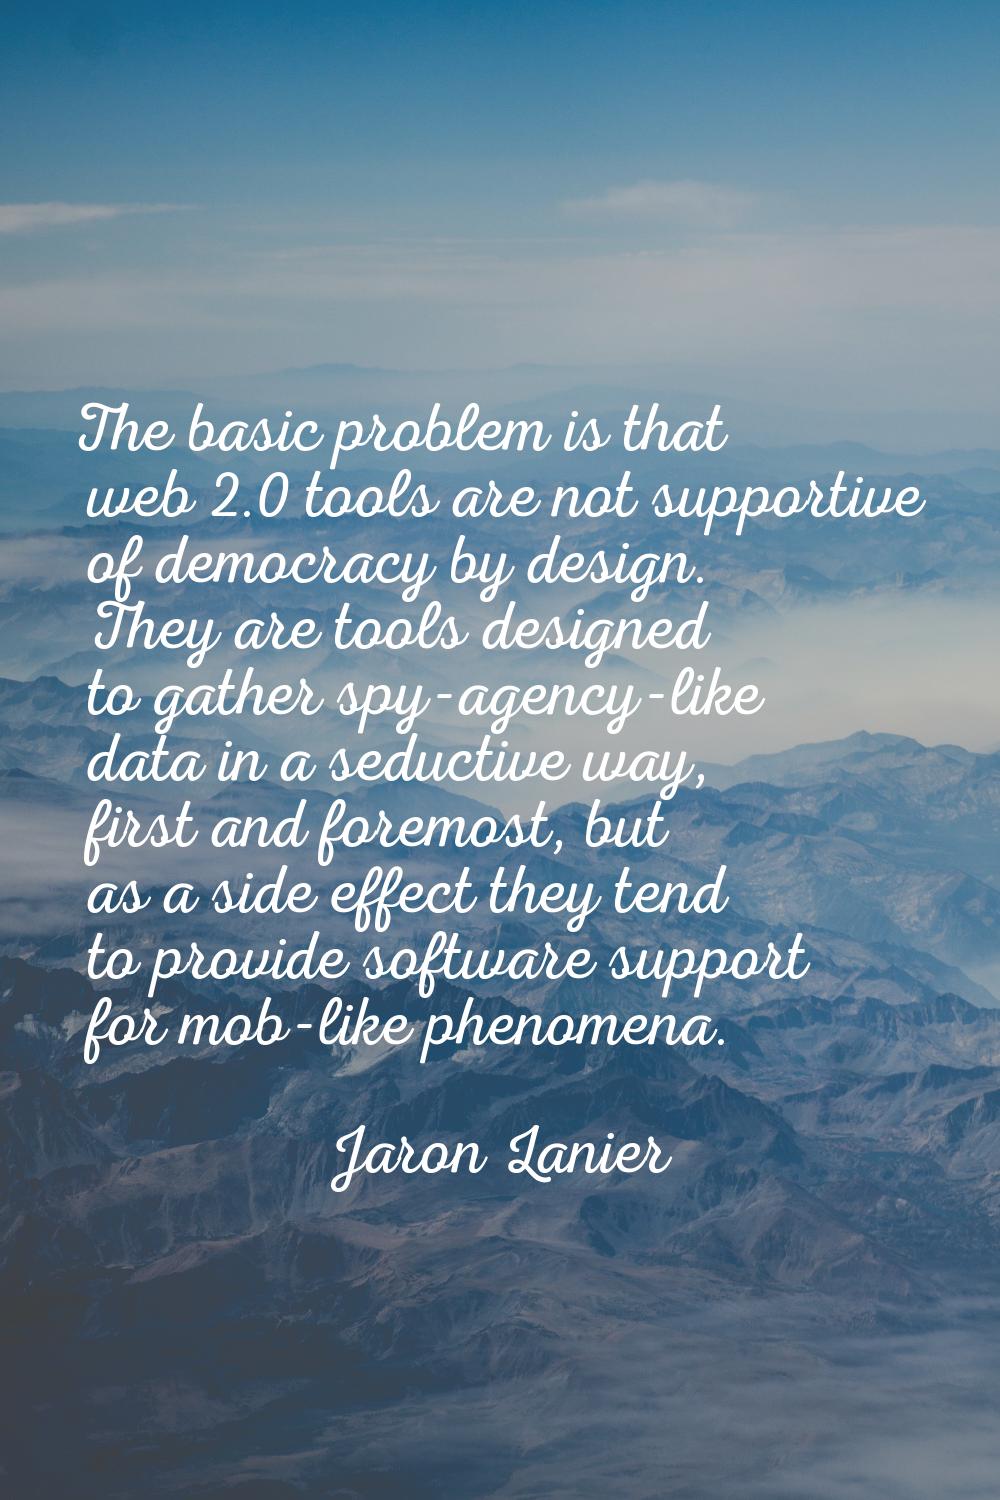 The basic problem is that web 2.0 tools are not supportive of democracy by design. They are tools d